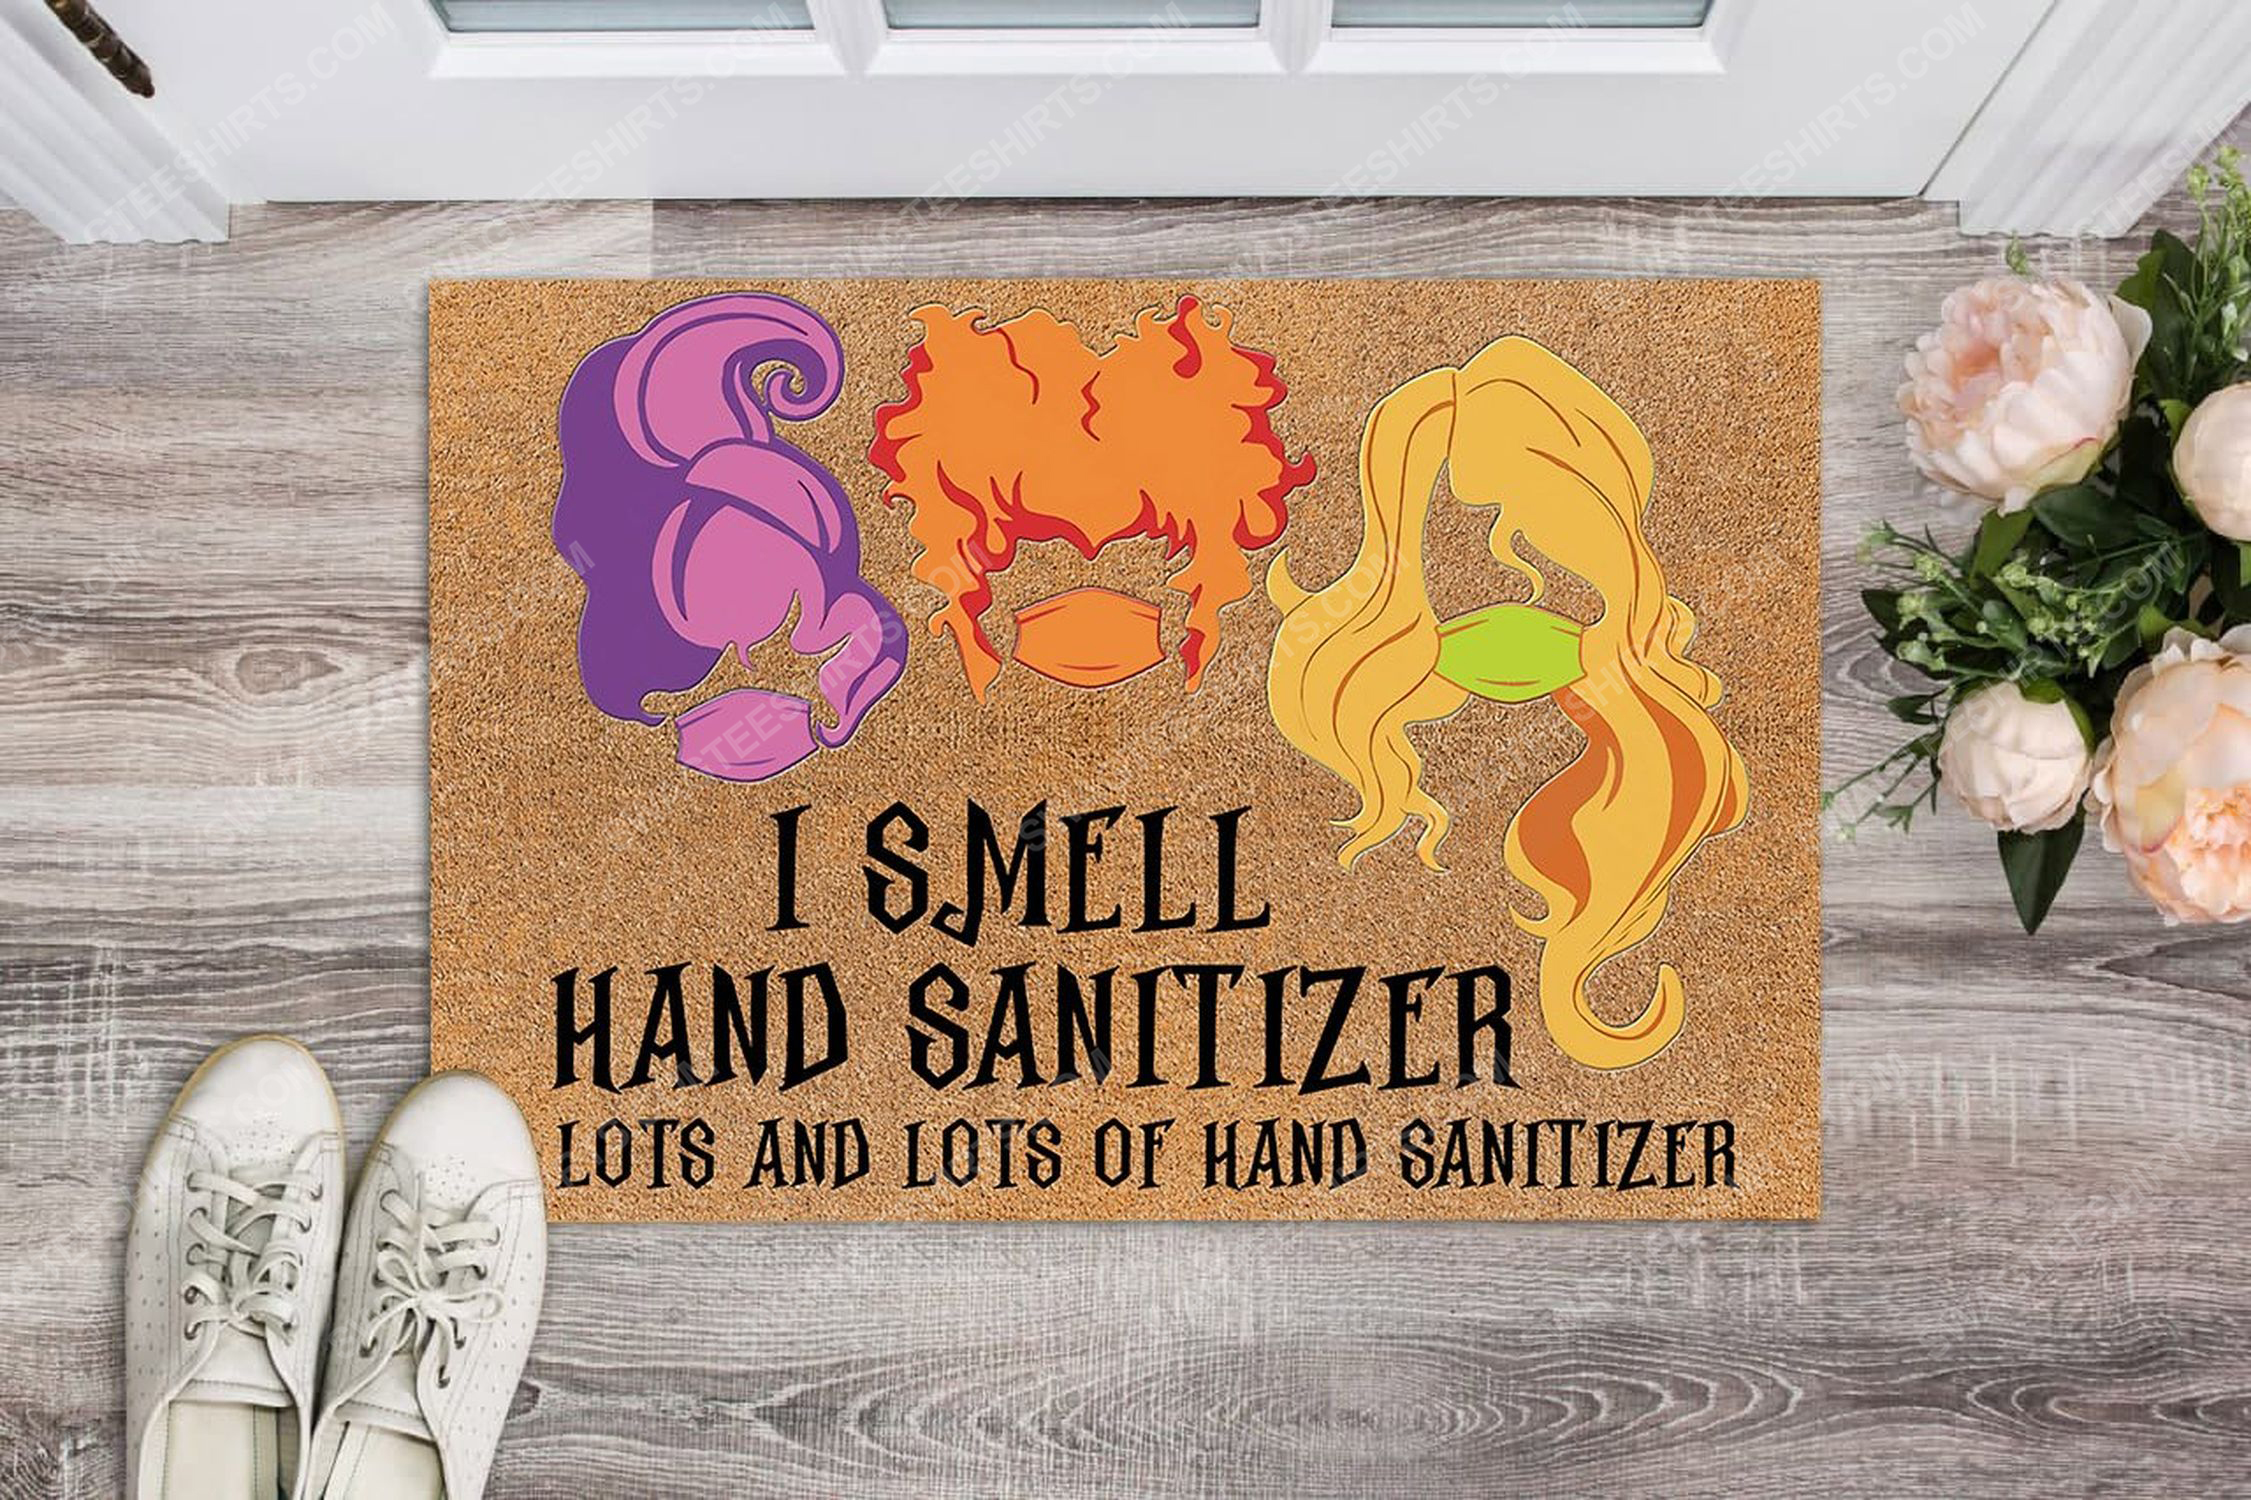 [special edition] Hocus pocus i smell hand sanitizer lots and lots of hand sanitizer teacher doormat – maria